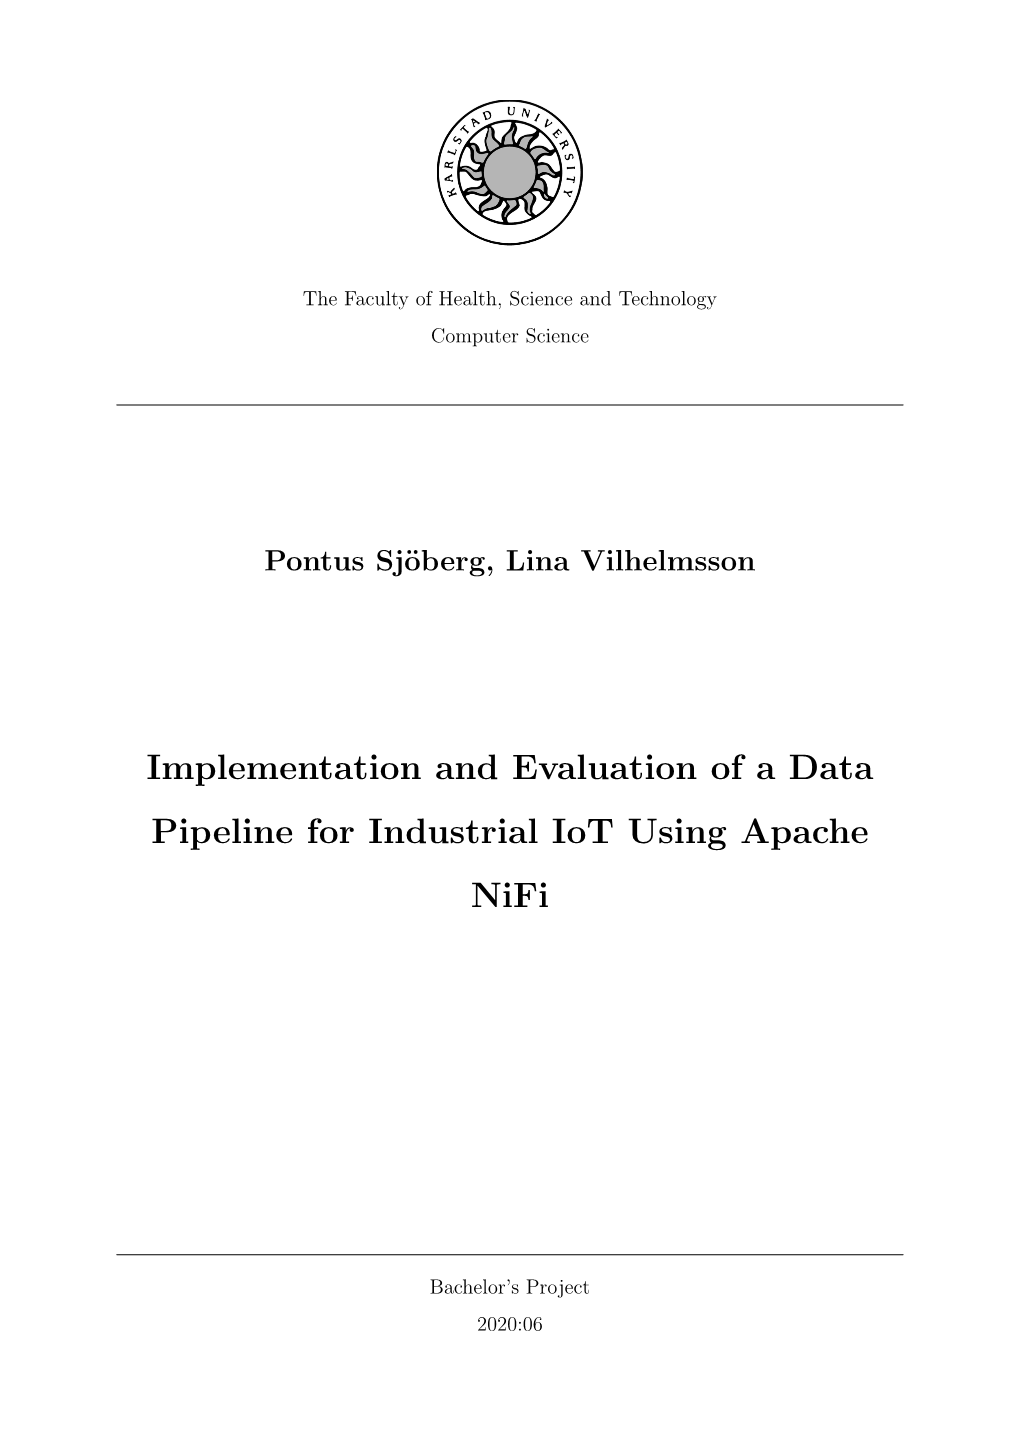 Implementation and Evaluation of a Data Pipeline for Industrial Iot Using Apache Nifi